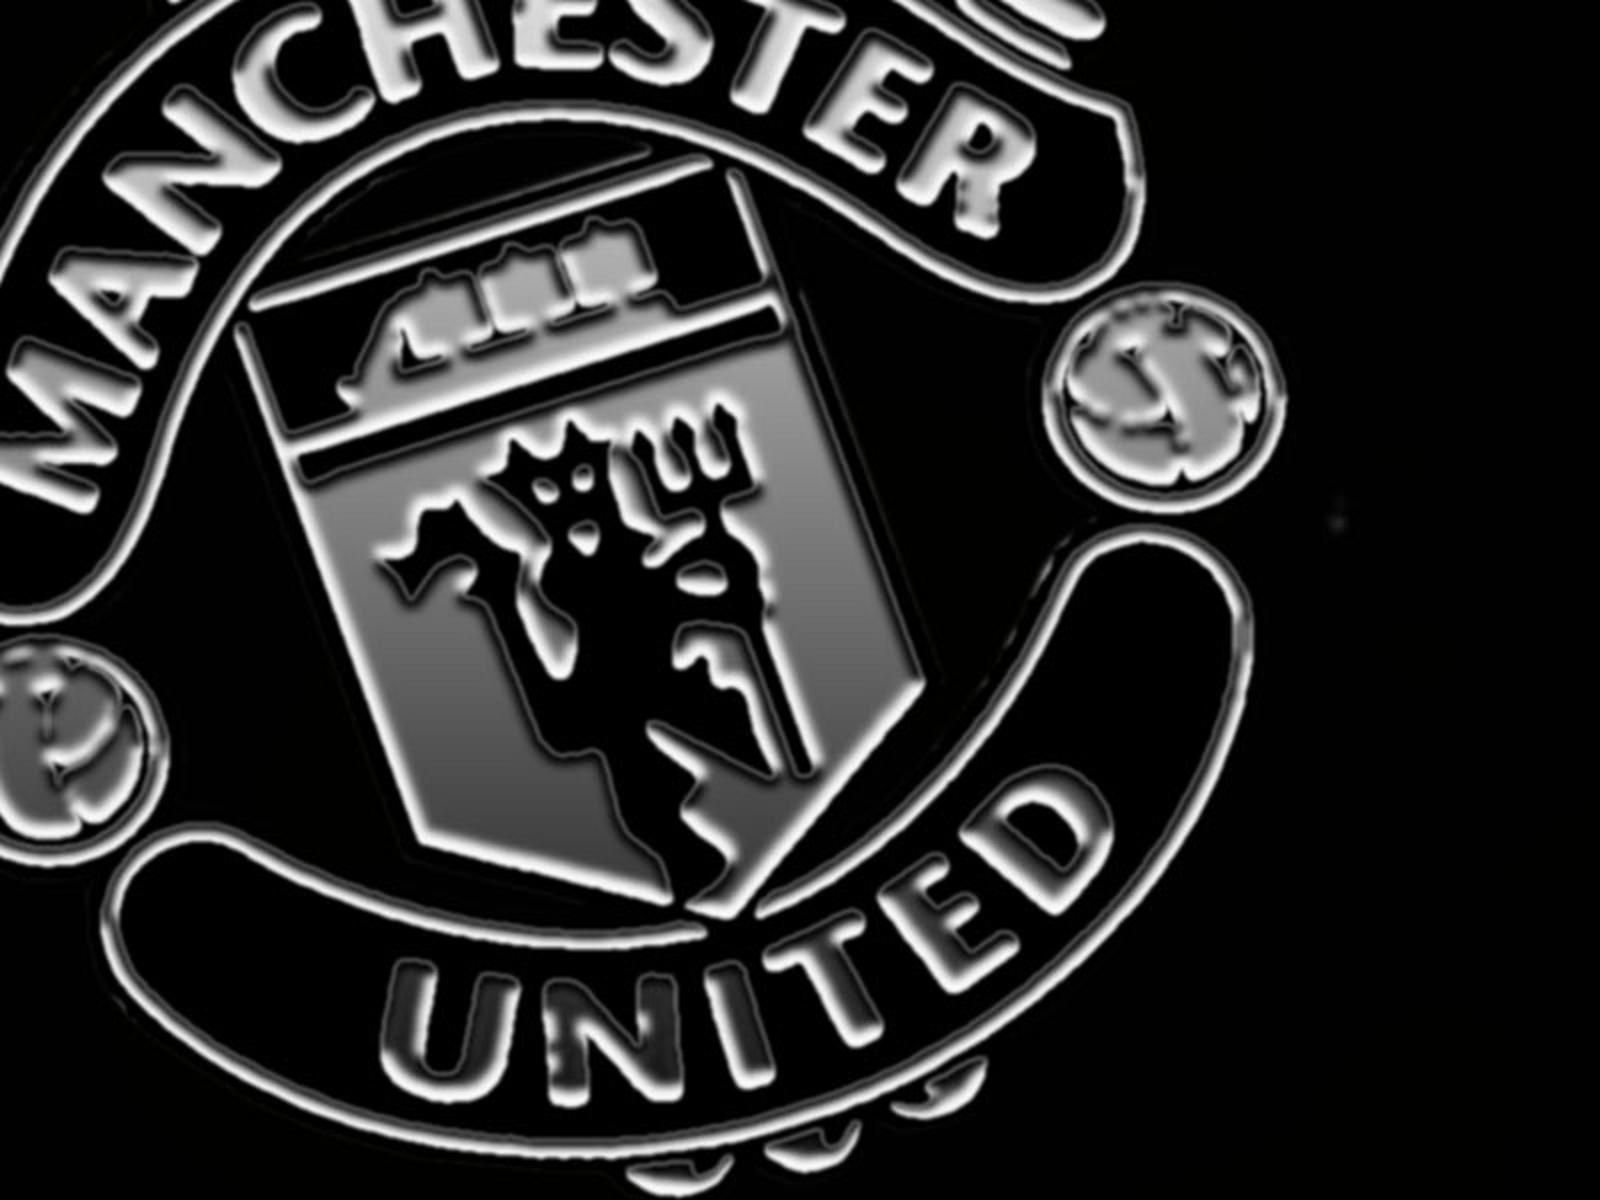 Manchester United logo Cool Sport Wallpapers